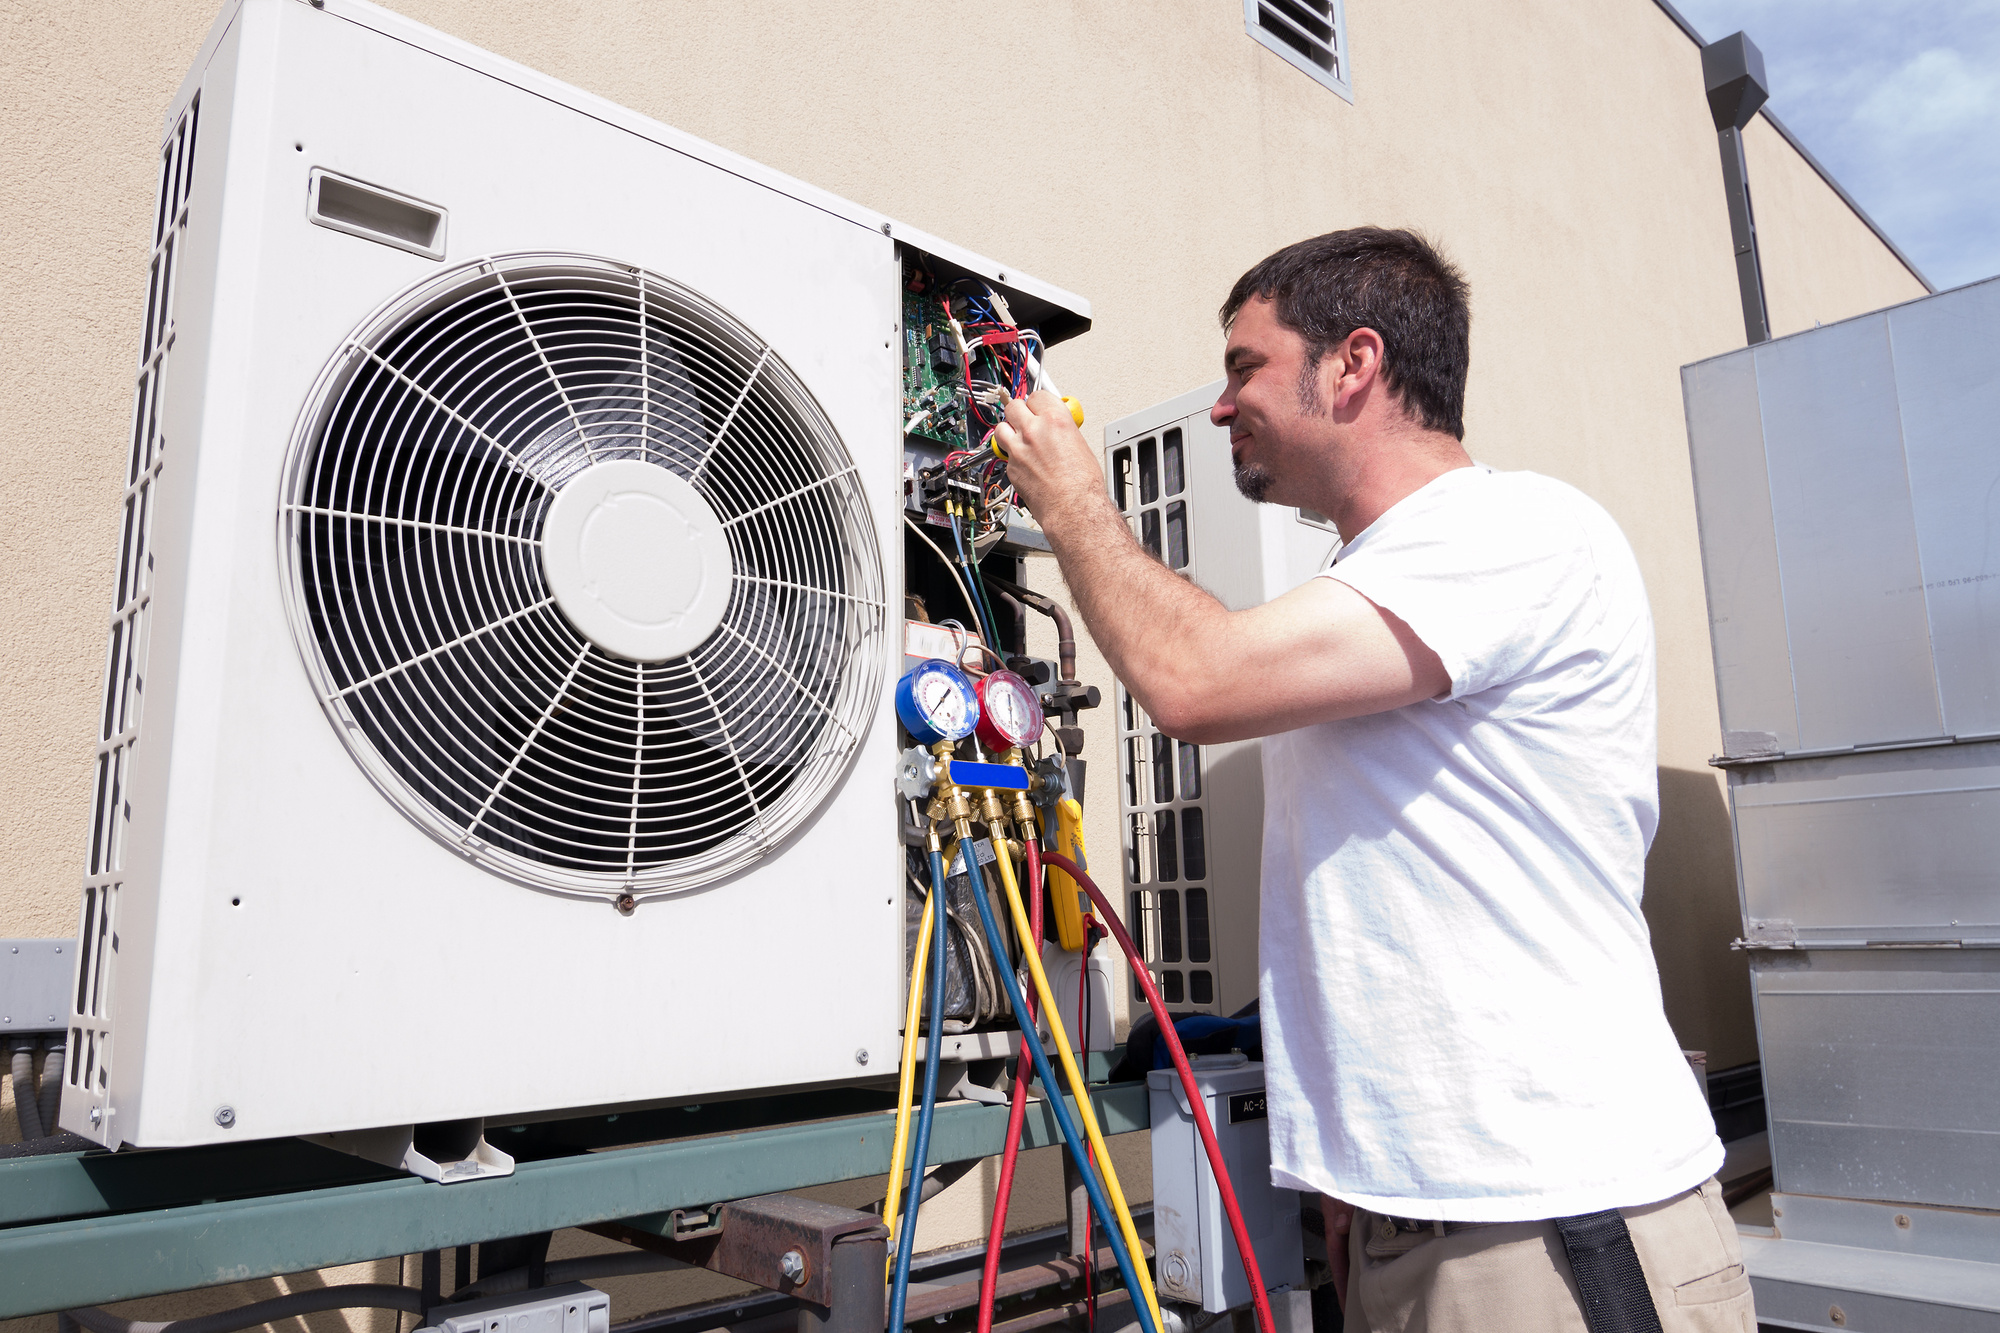 When your HVAC system needs expert repair or replacement, click here to explore how to hire an HVAC technician you can trust.